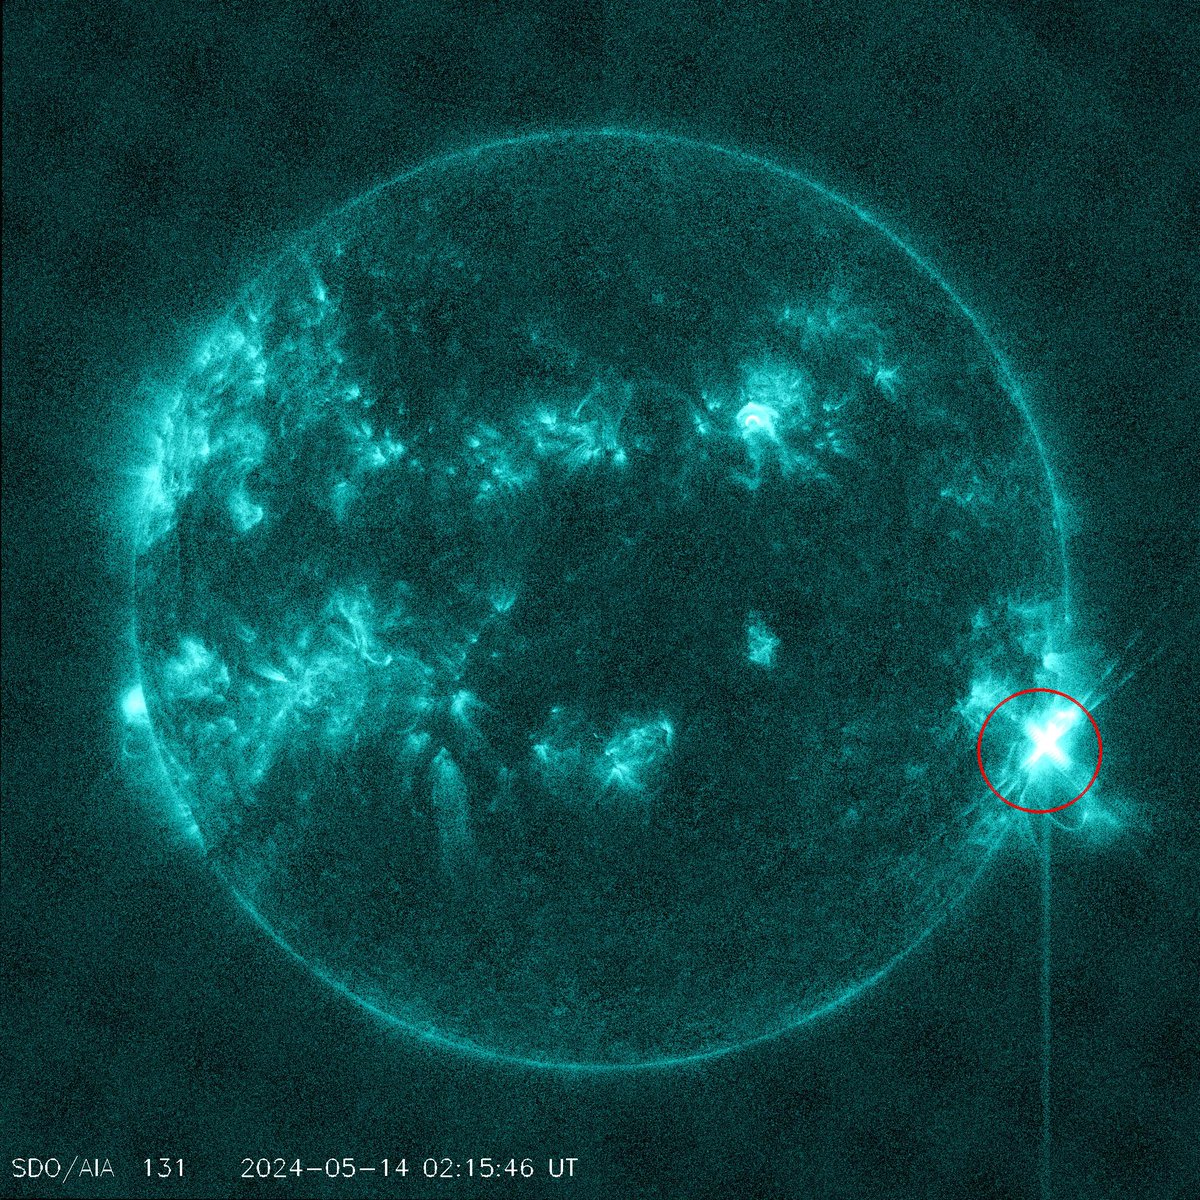 Major X1.72 flare from sunspot region 3664
Follow live on spaceweather.live/l/flare